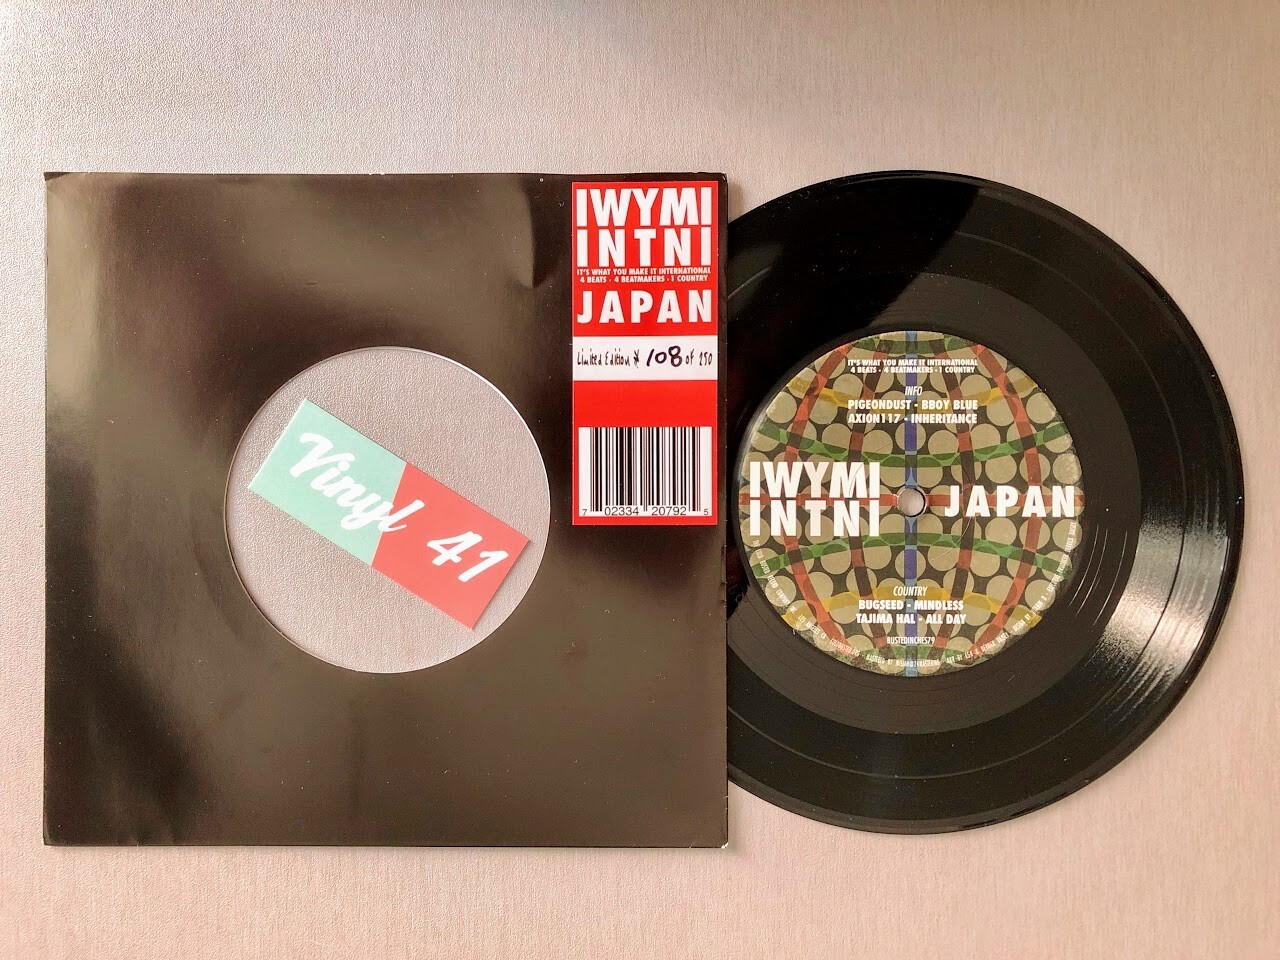 IWYMI INTNl: Japan (Cold Busted)